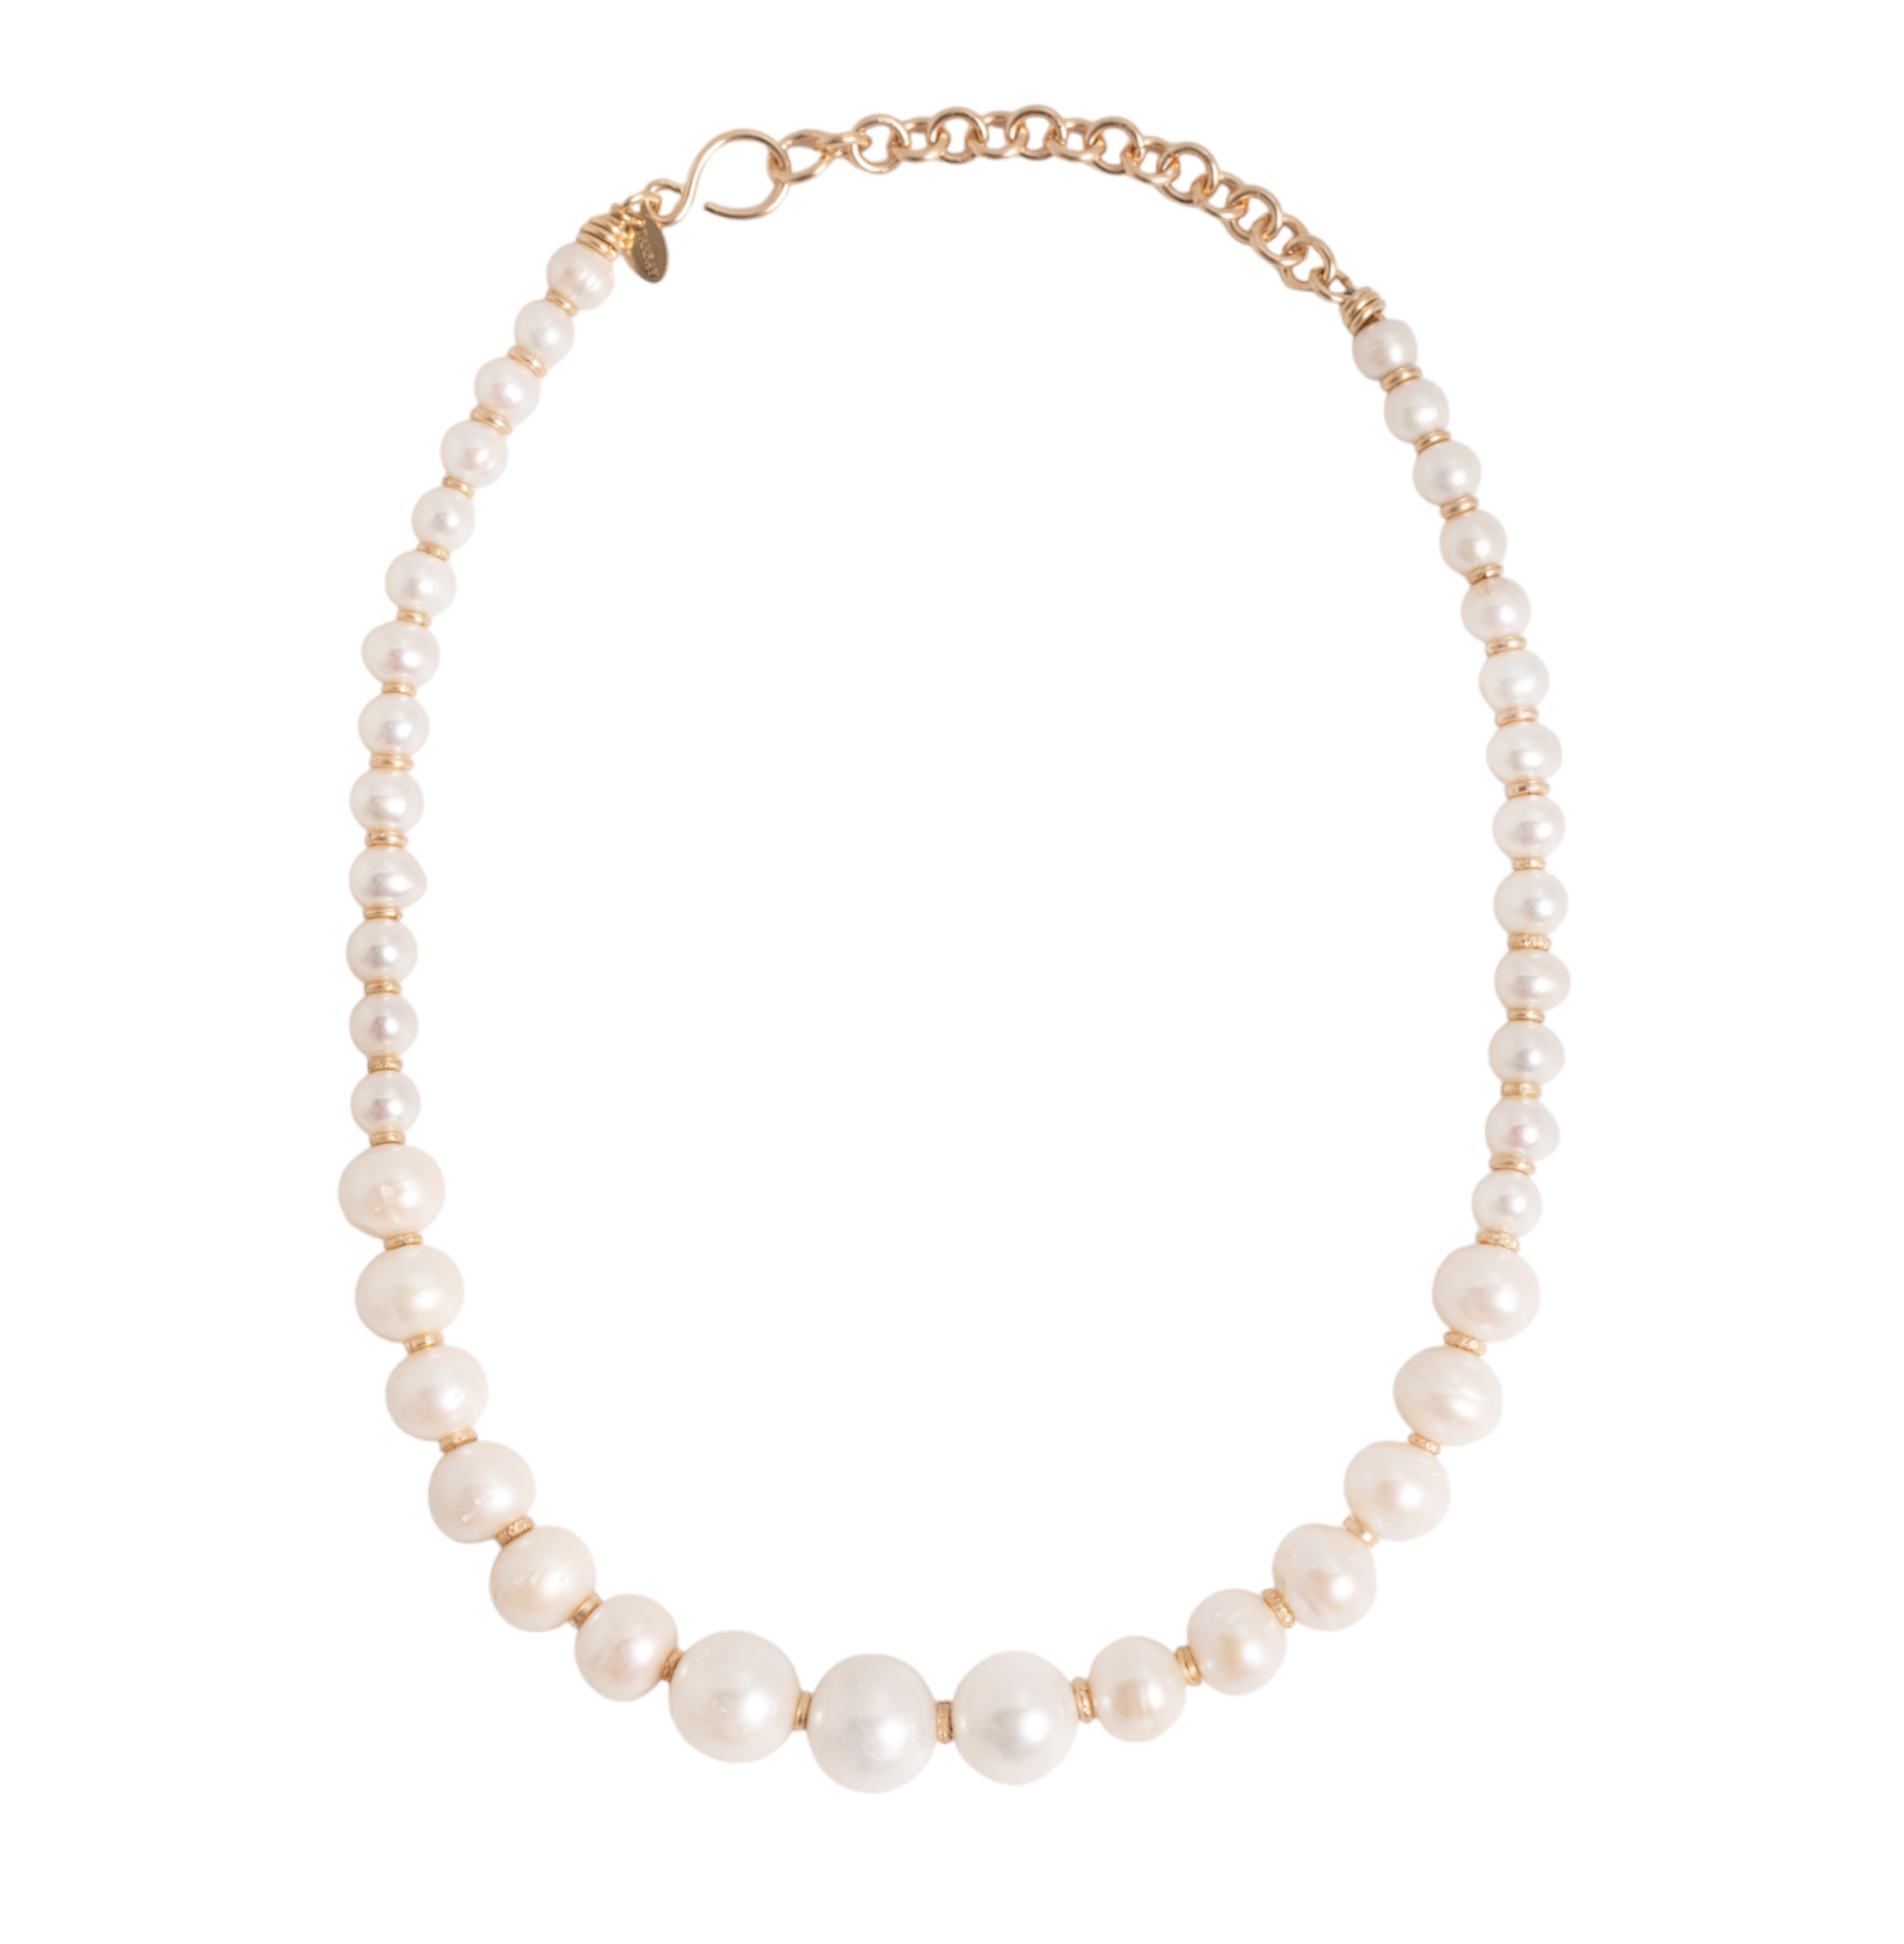 Cubagua Necklace #9 - Pearl Necklaces TARBAY   